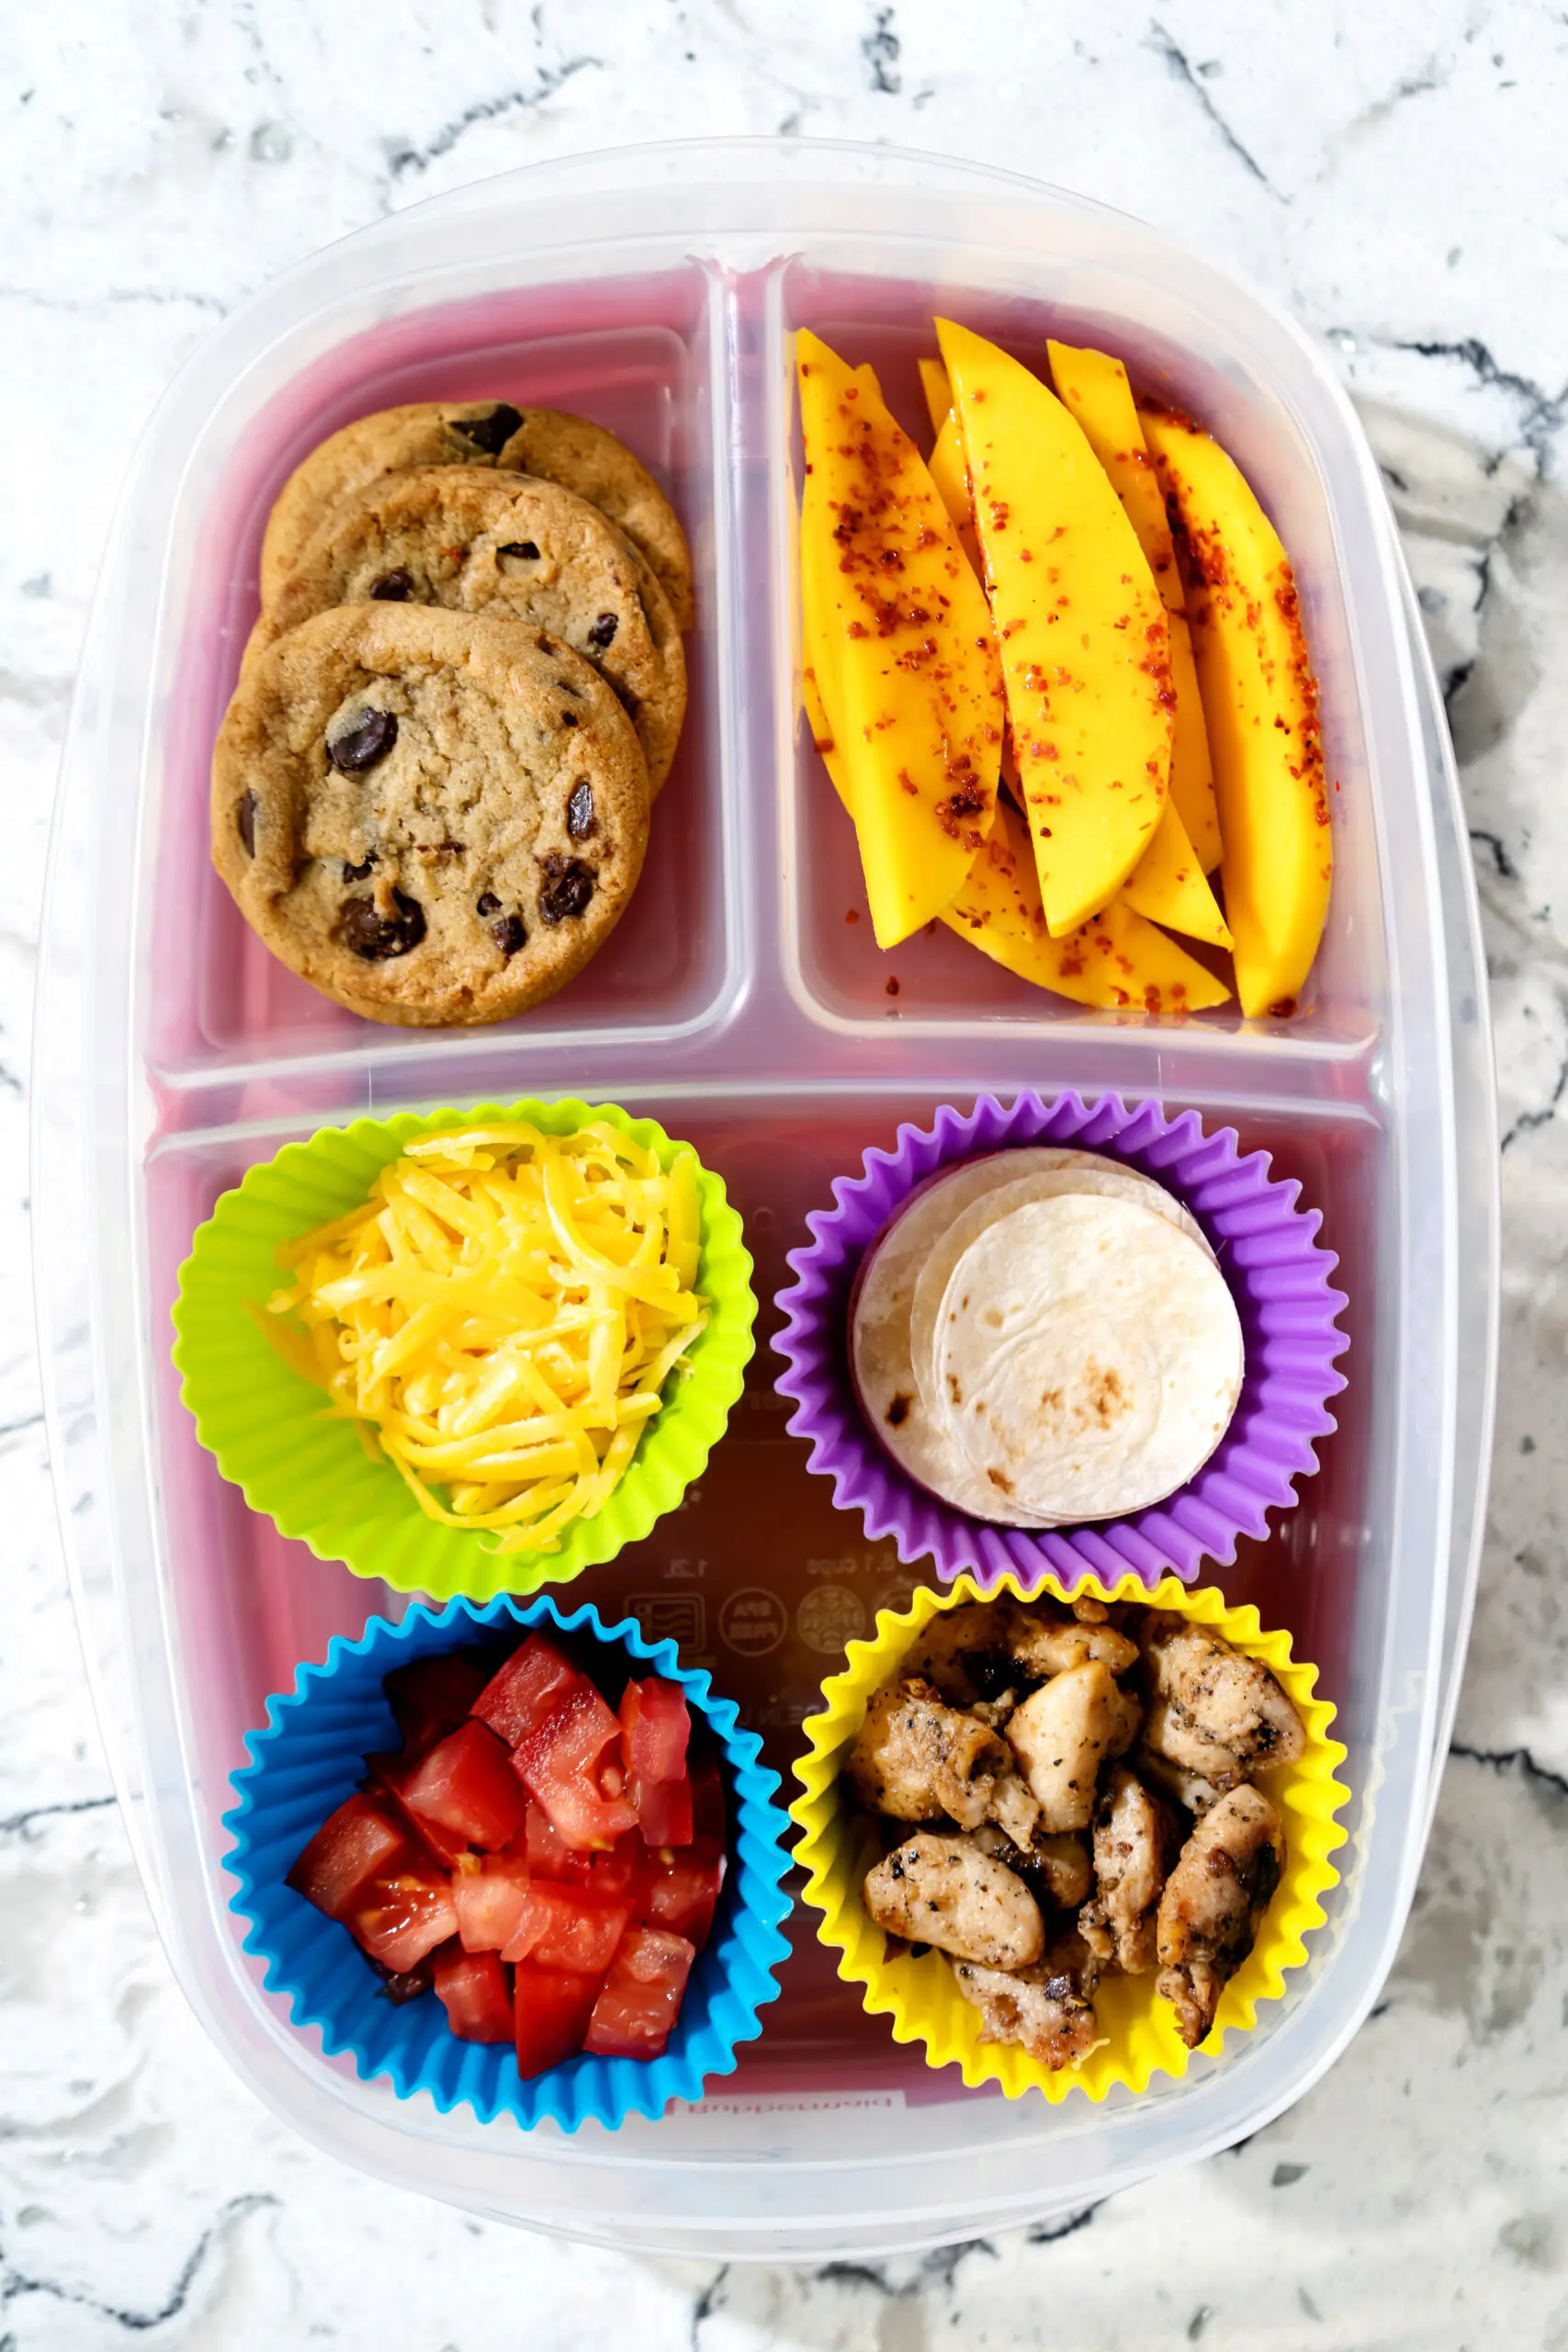 https://realfoodbydad.com/wp-content/uploads/2022/08/DIY-Lunchable-The-Taco-Real-Food-by-Dad-scaled.jpg.webp